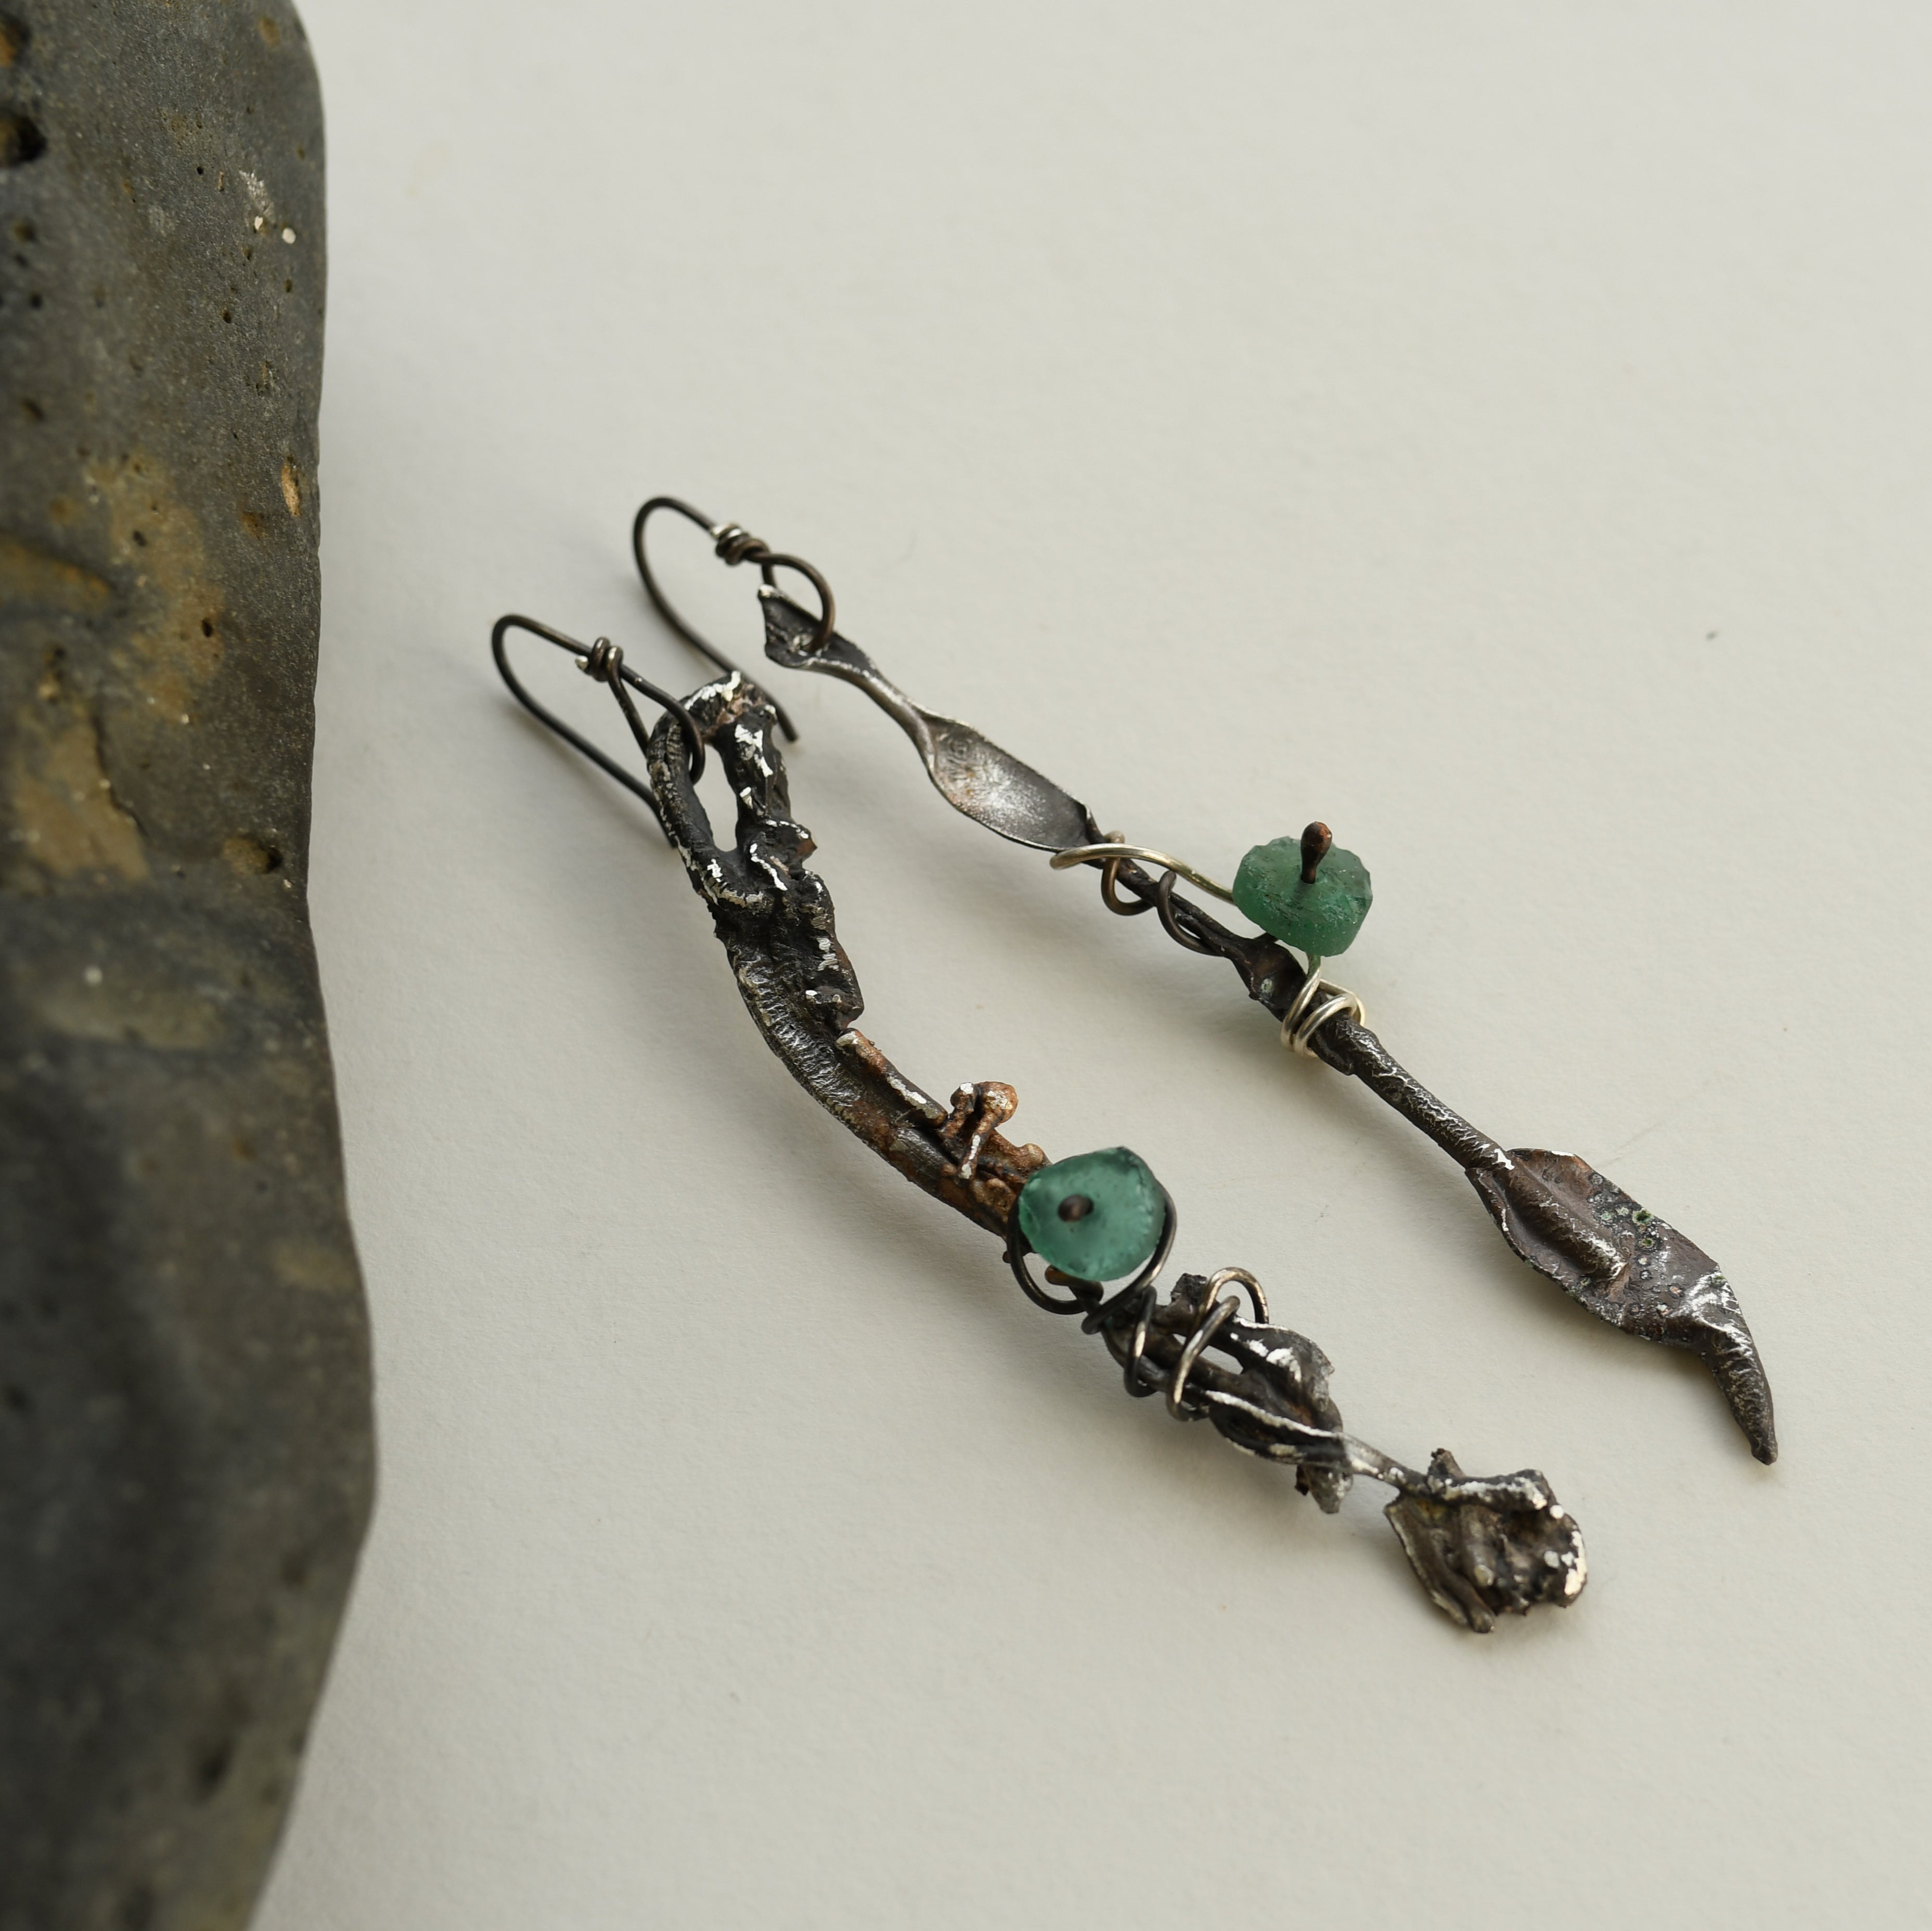 Walking Wild Silver Earrings with Ancient Roman Glass